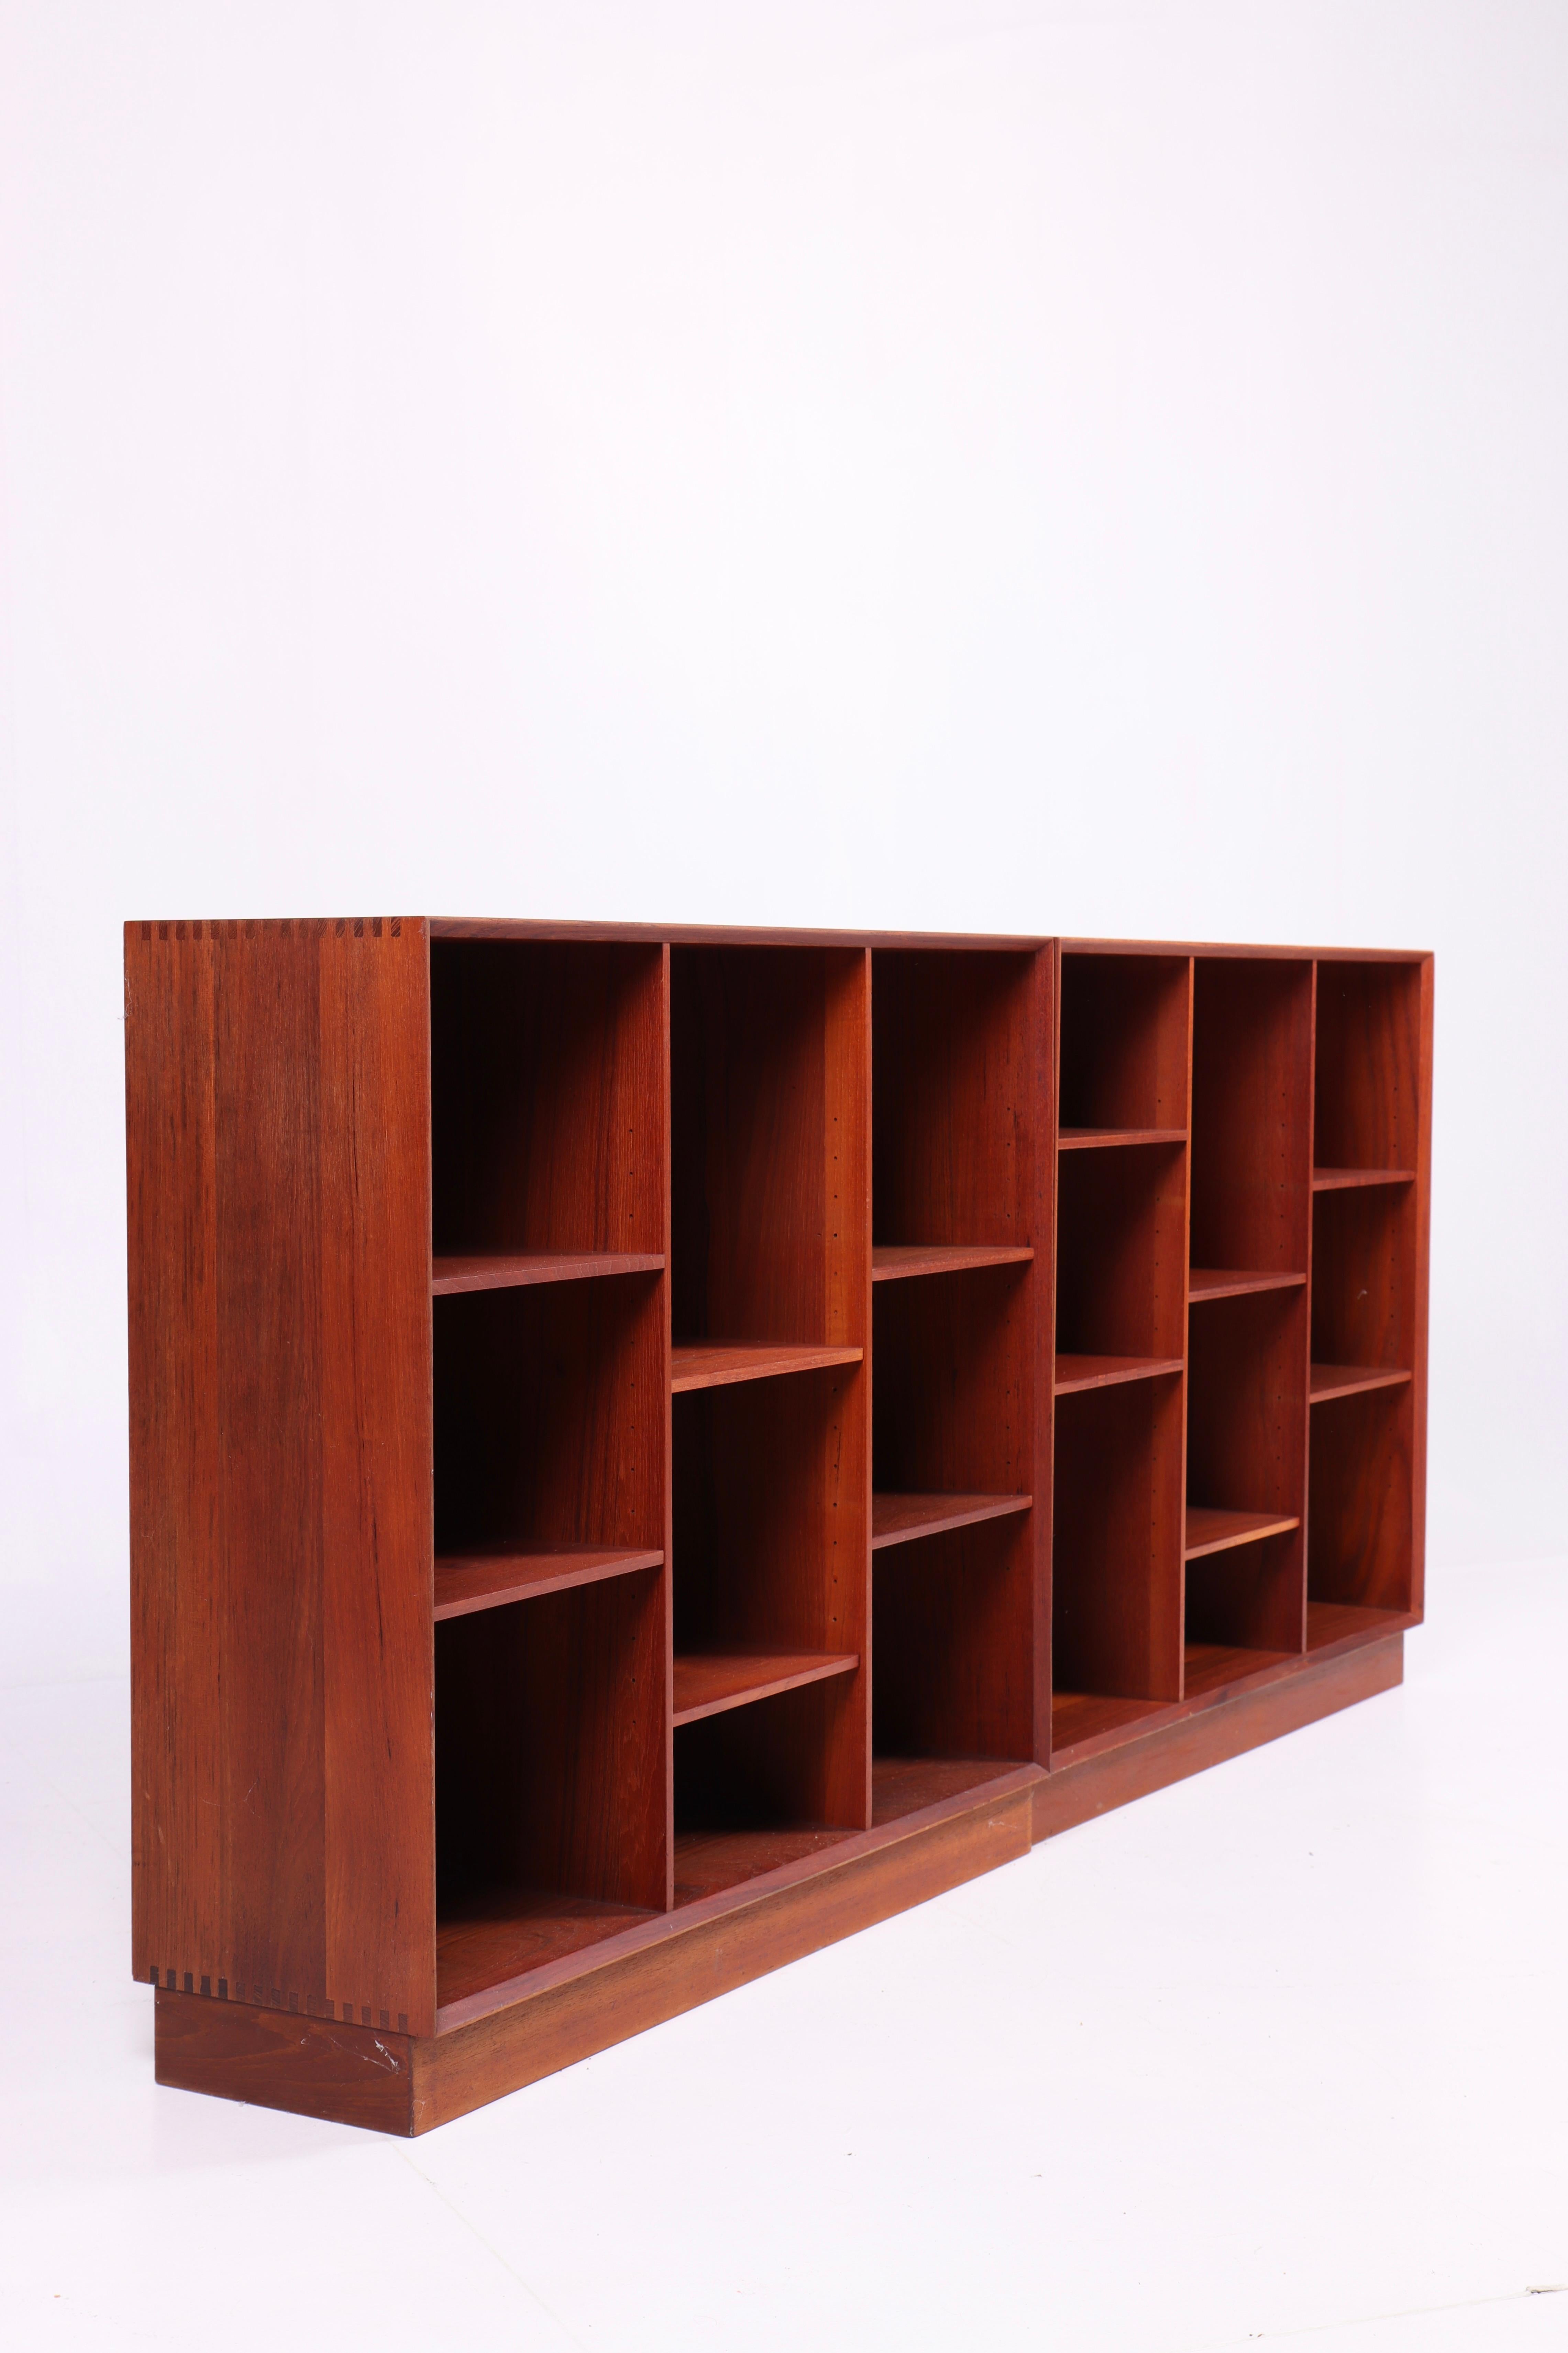 Danish Collection of Four Bookcases in Solid Teak by Hvidt & Mølgaard